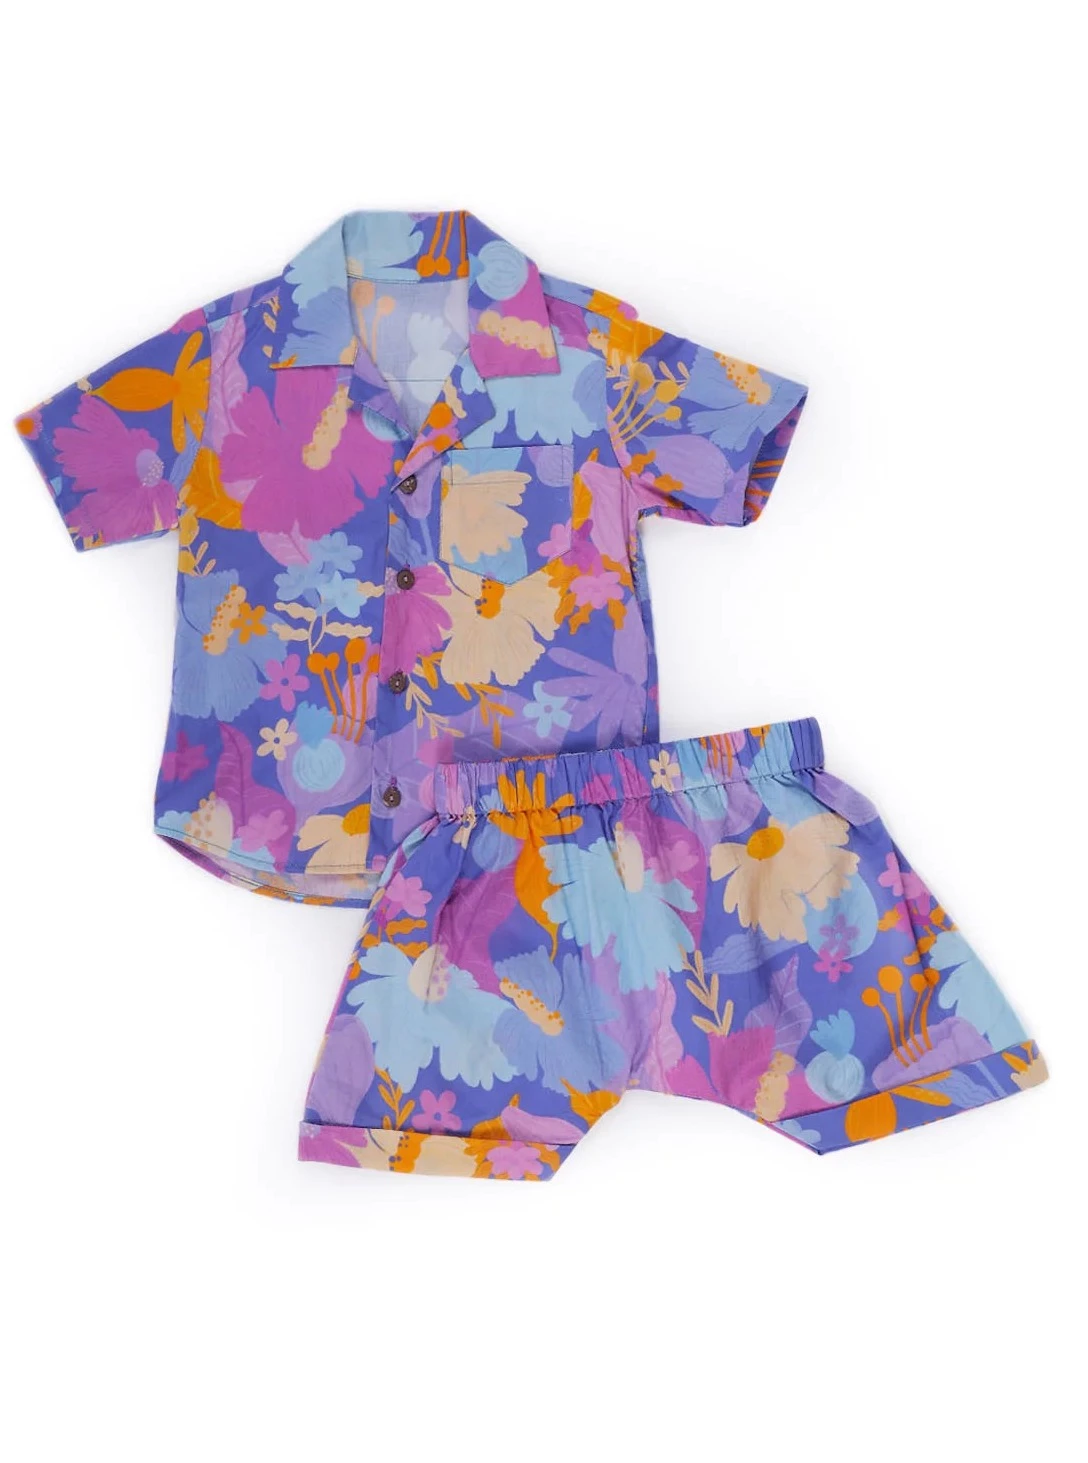 MIKO LOLO Daffy Infant Co-Ord Set in Organic Cotton